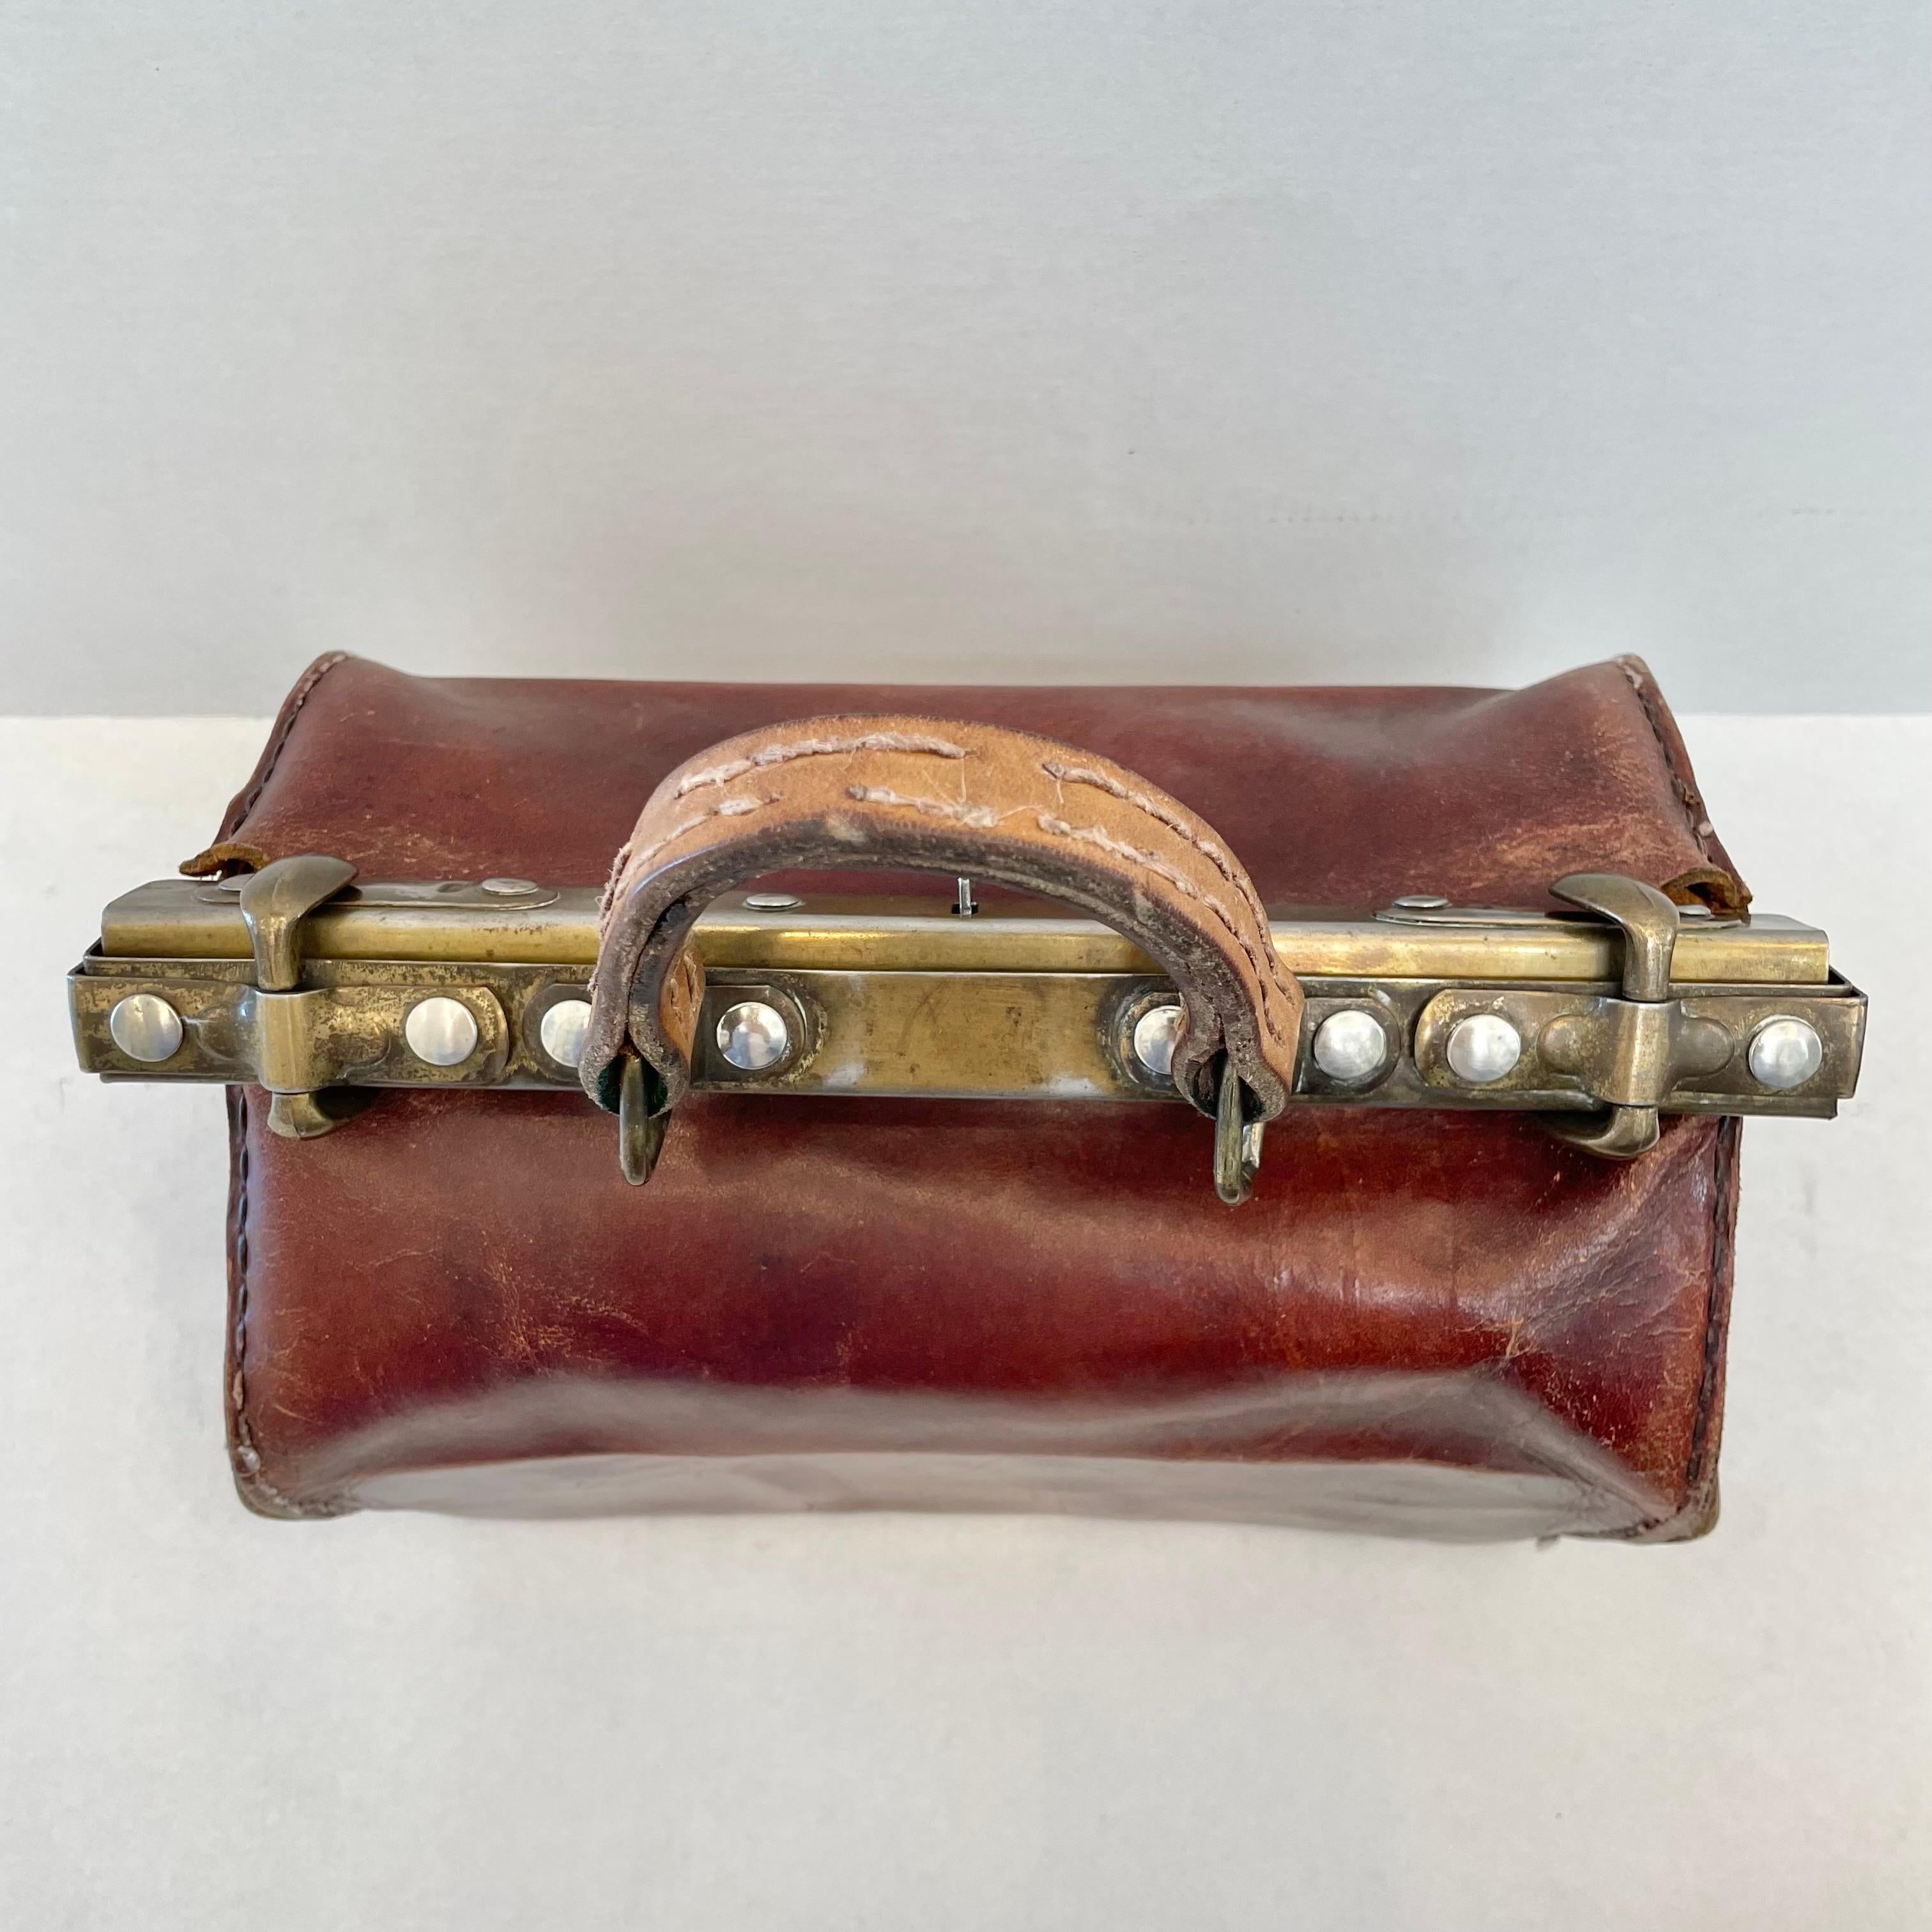 leather doctor bag purse